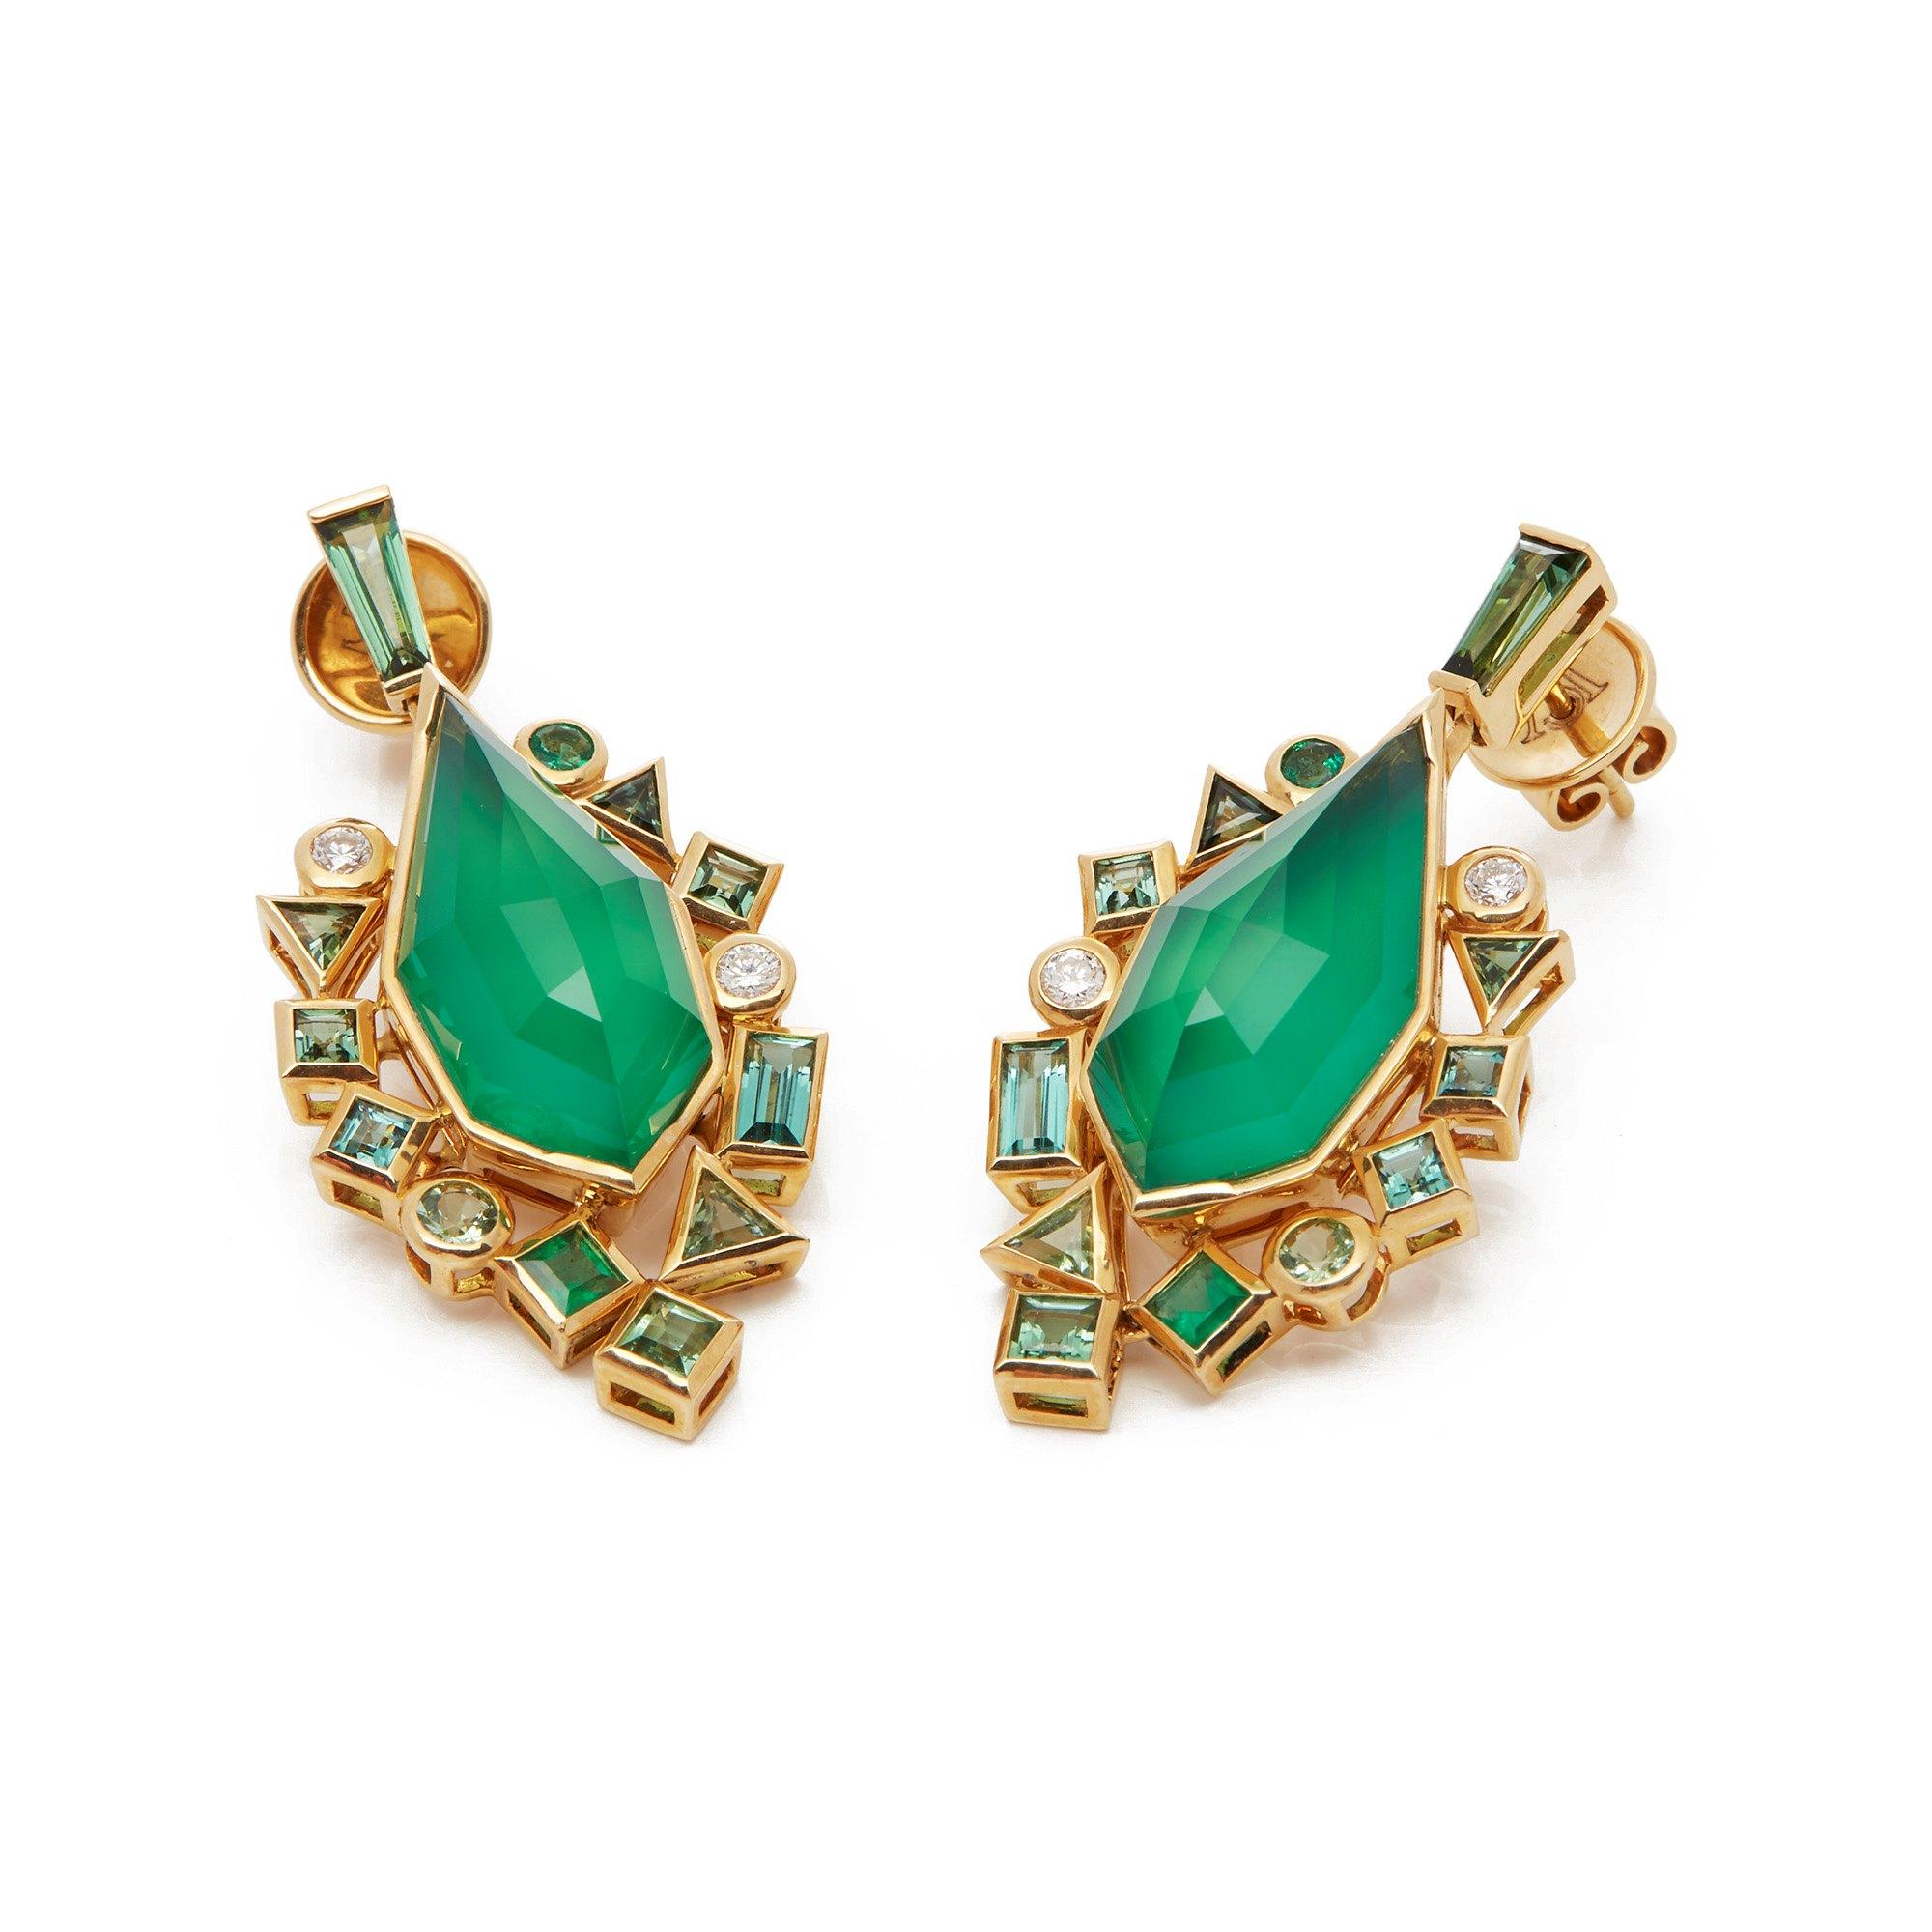 This Earrings by Stephen Webster are from his Crystal Haze Gold Struck Collection and features Two Green Agate set sections Totalling 14.10cts Surrounded with mixed cut Green Tourmaline Totalling 2.76cts and Round Briliant Cut Diamonds Totalling